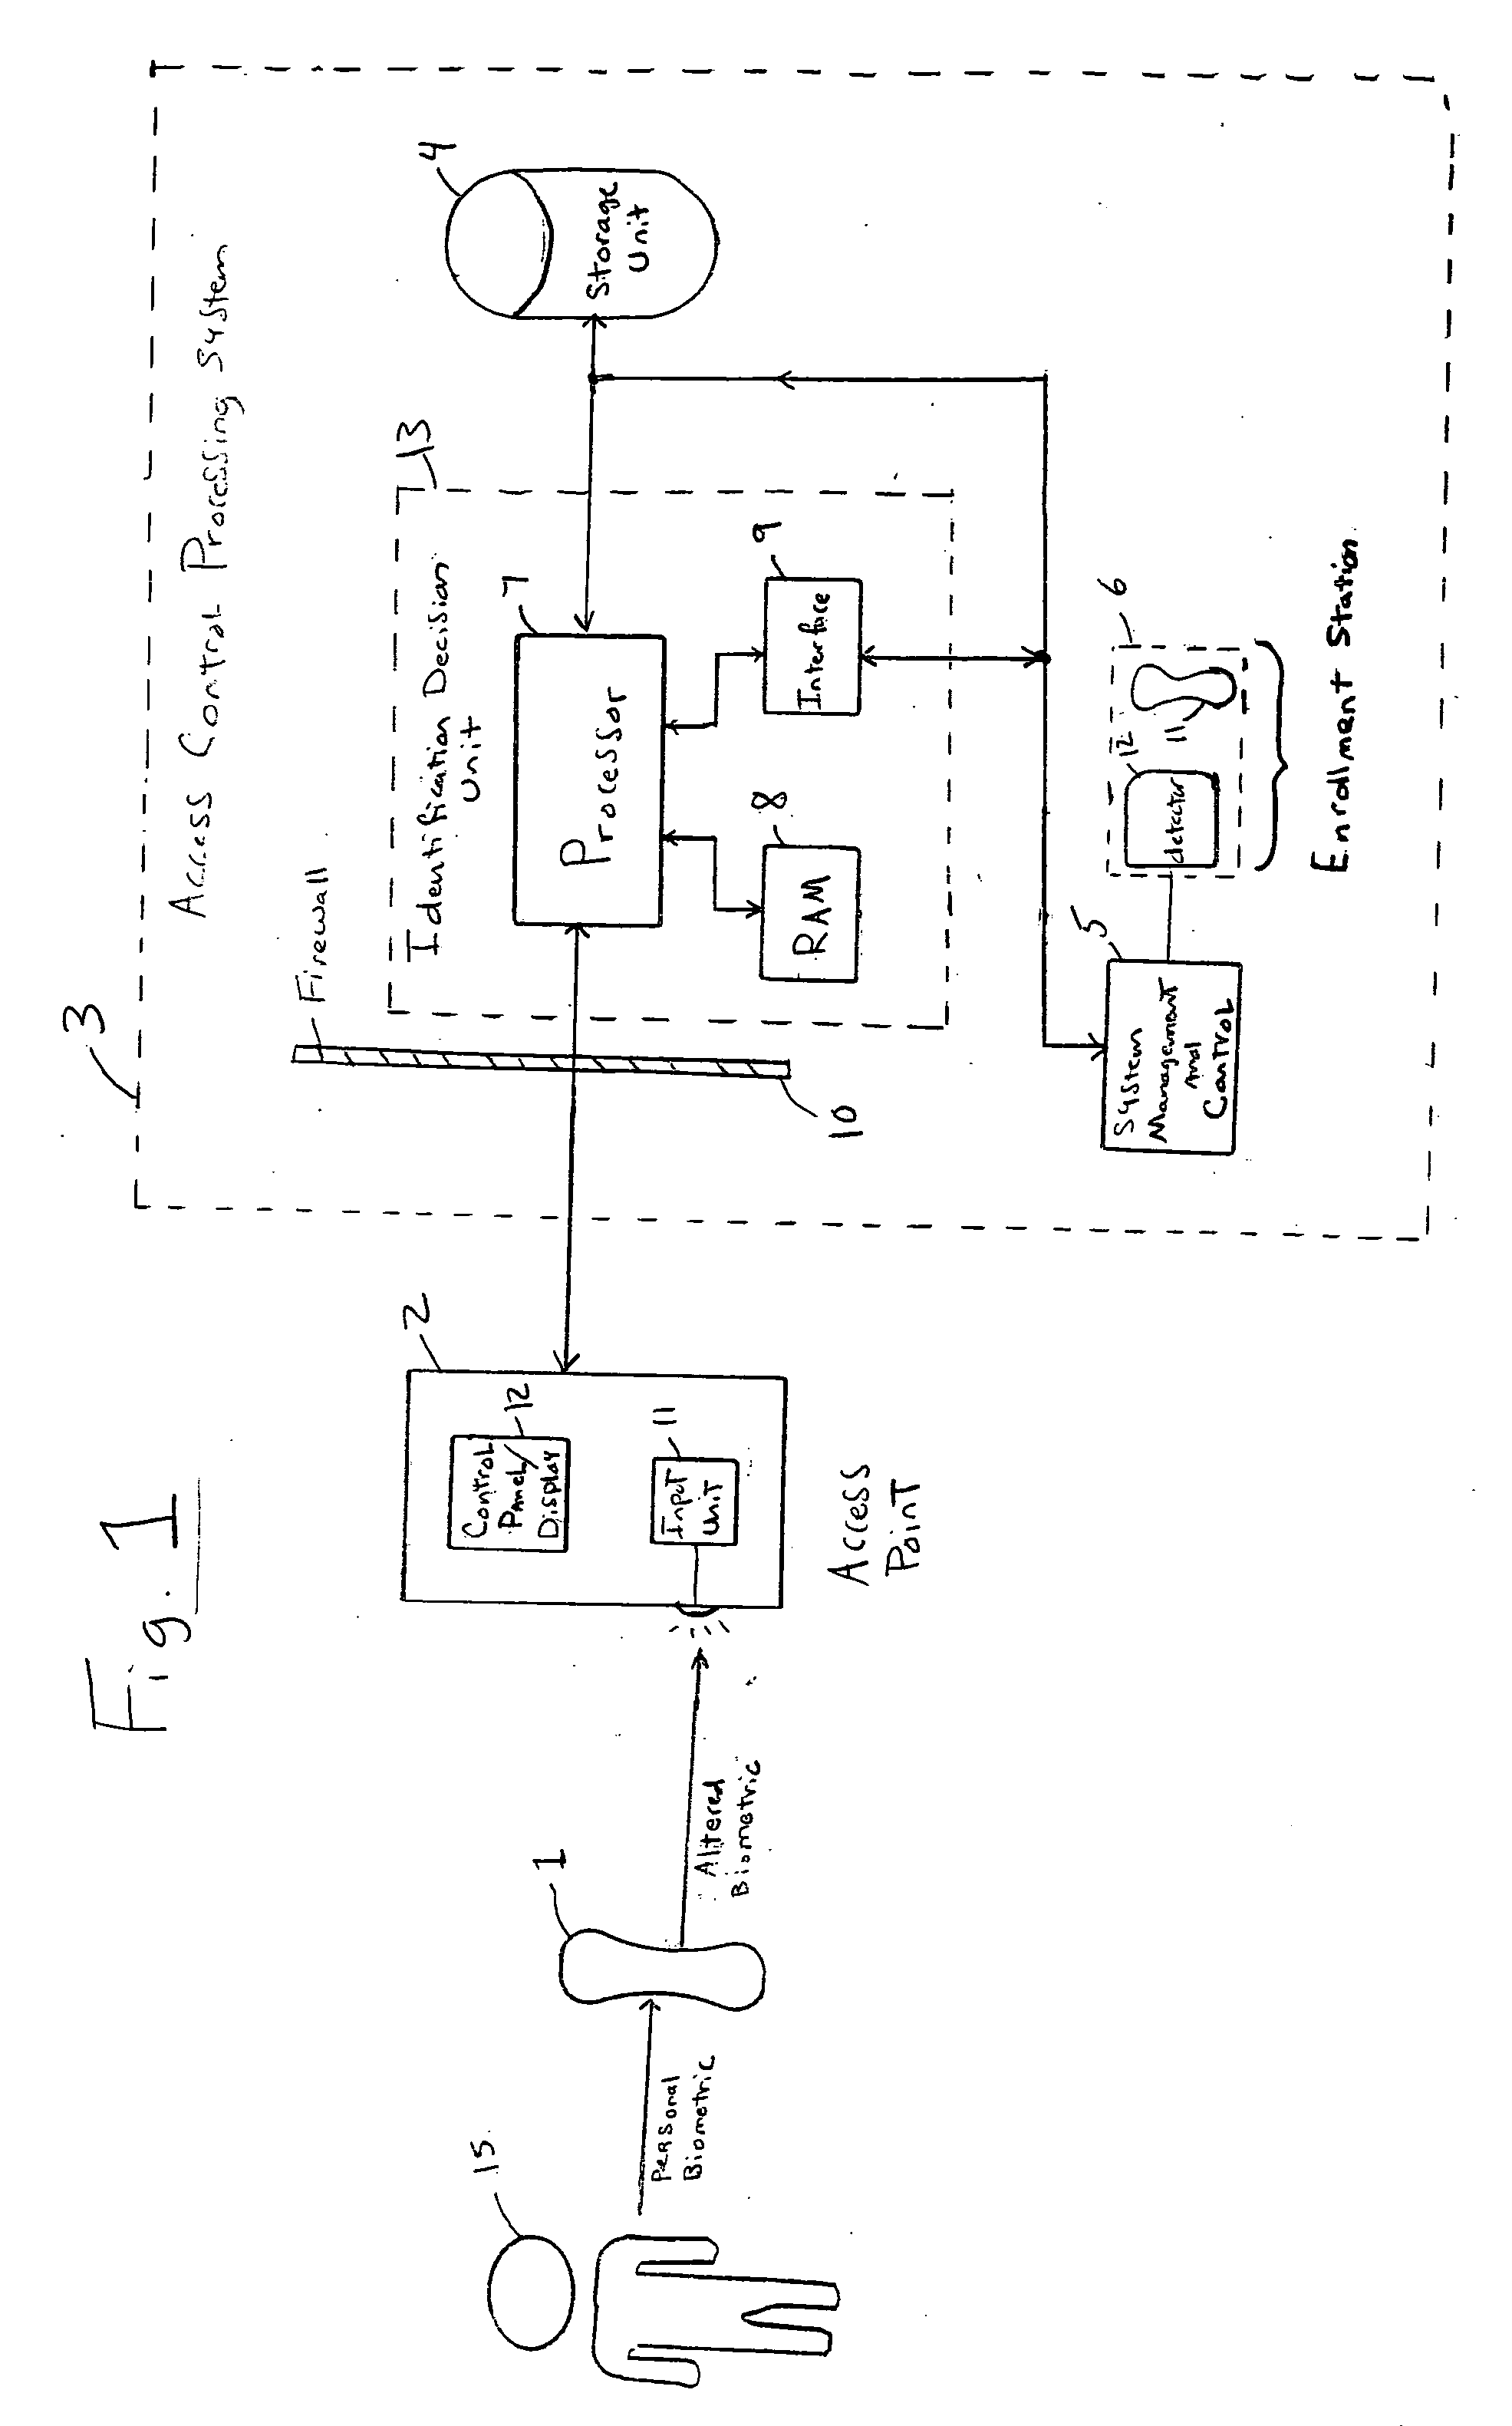 System and method for performing security access control based on modified biometric data